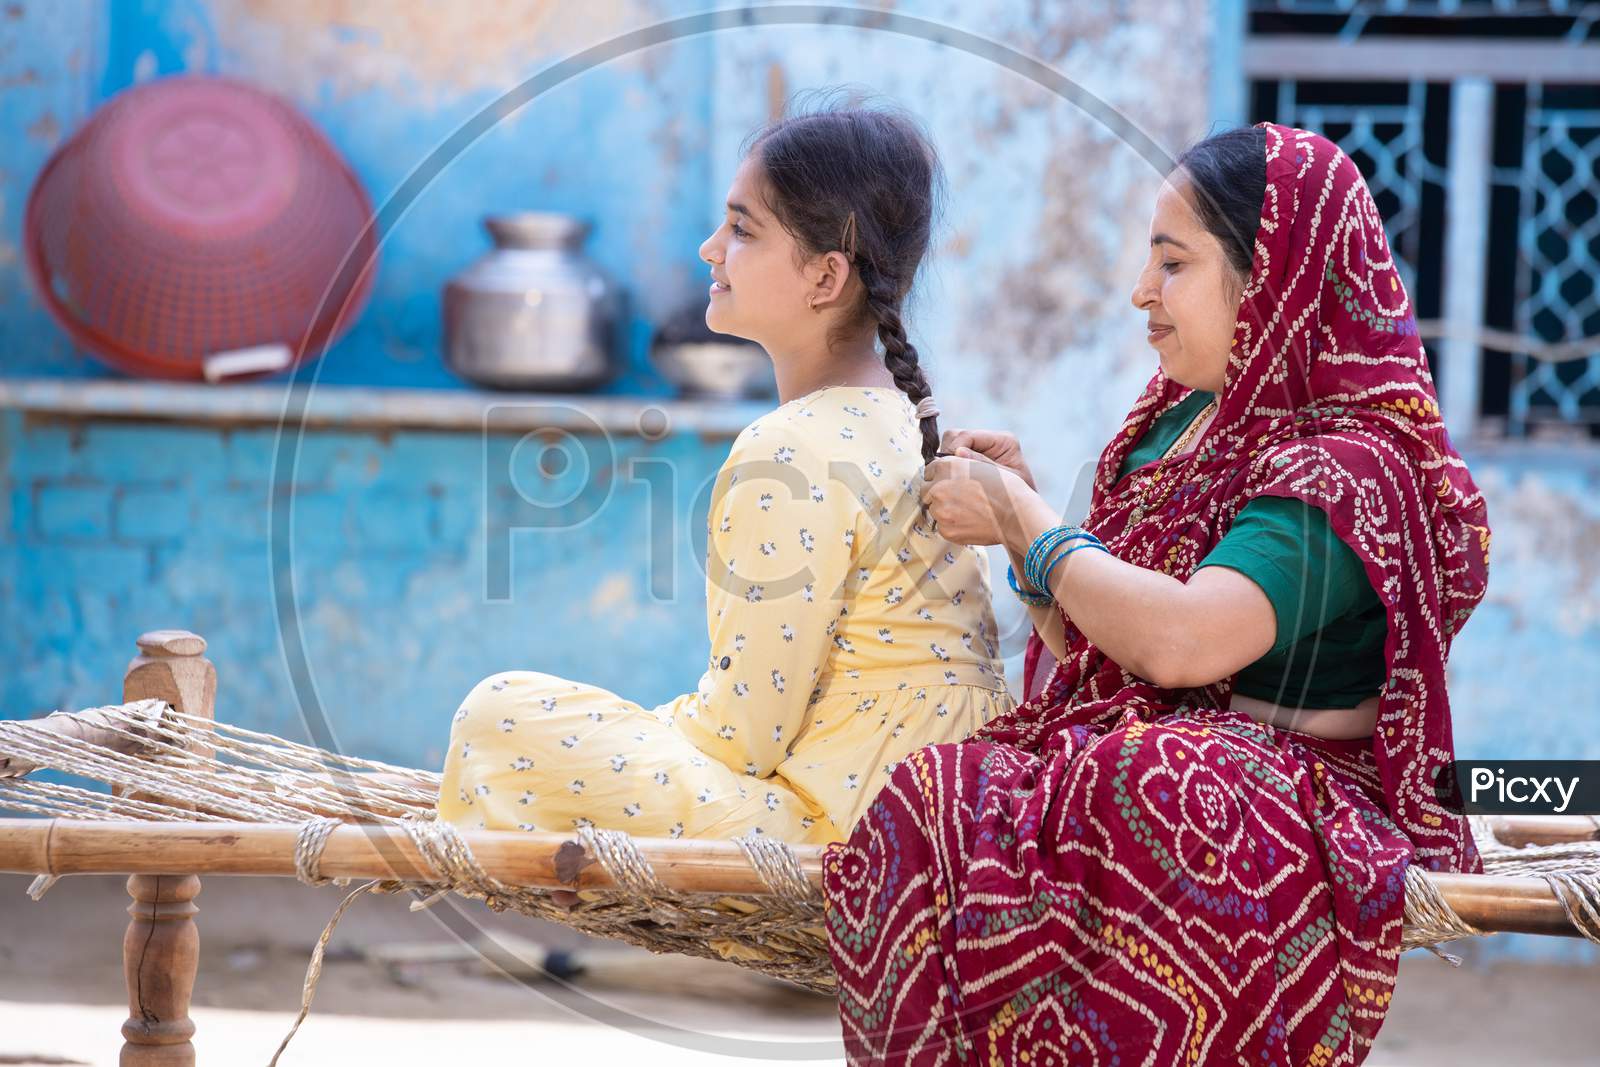 Rural Indian Mother Braids Hair Of Her Young Adorable Daughter While Sitting On Traditional Bed At Village Home. Cute Preschool Kid With Mum Spend Together, Woman In Red Sari And Girl In Yellow Dress